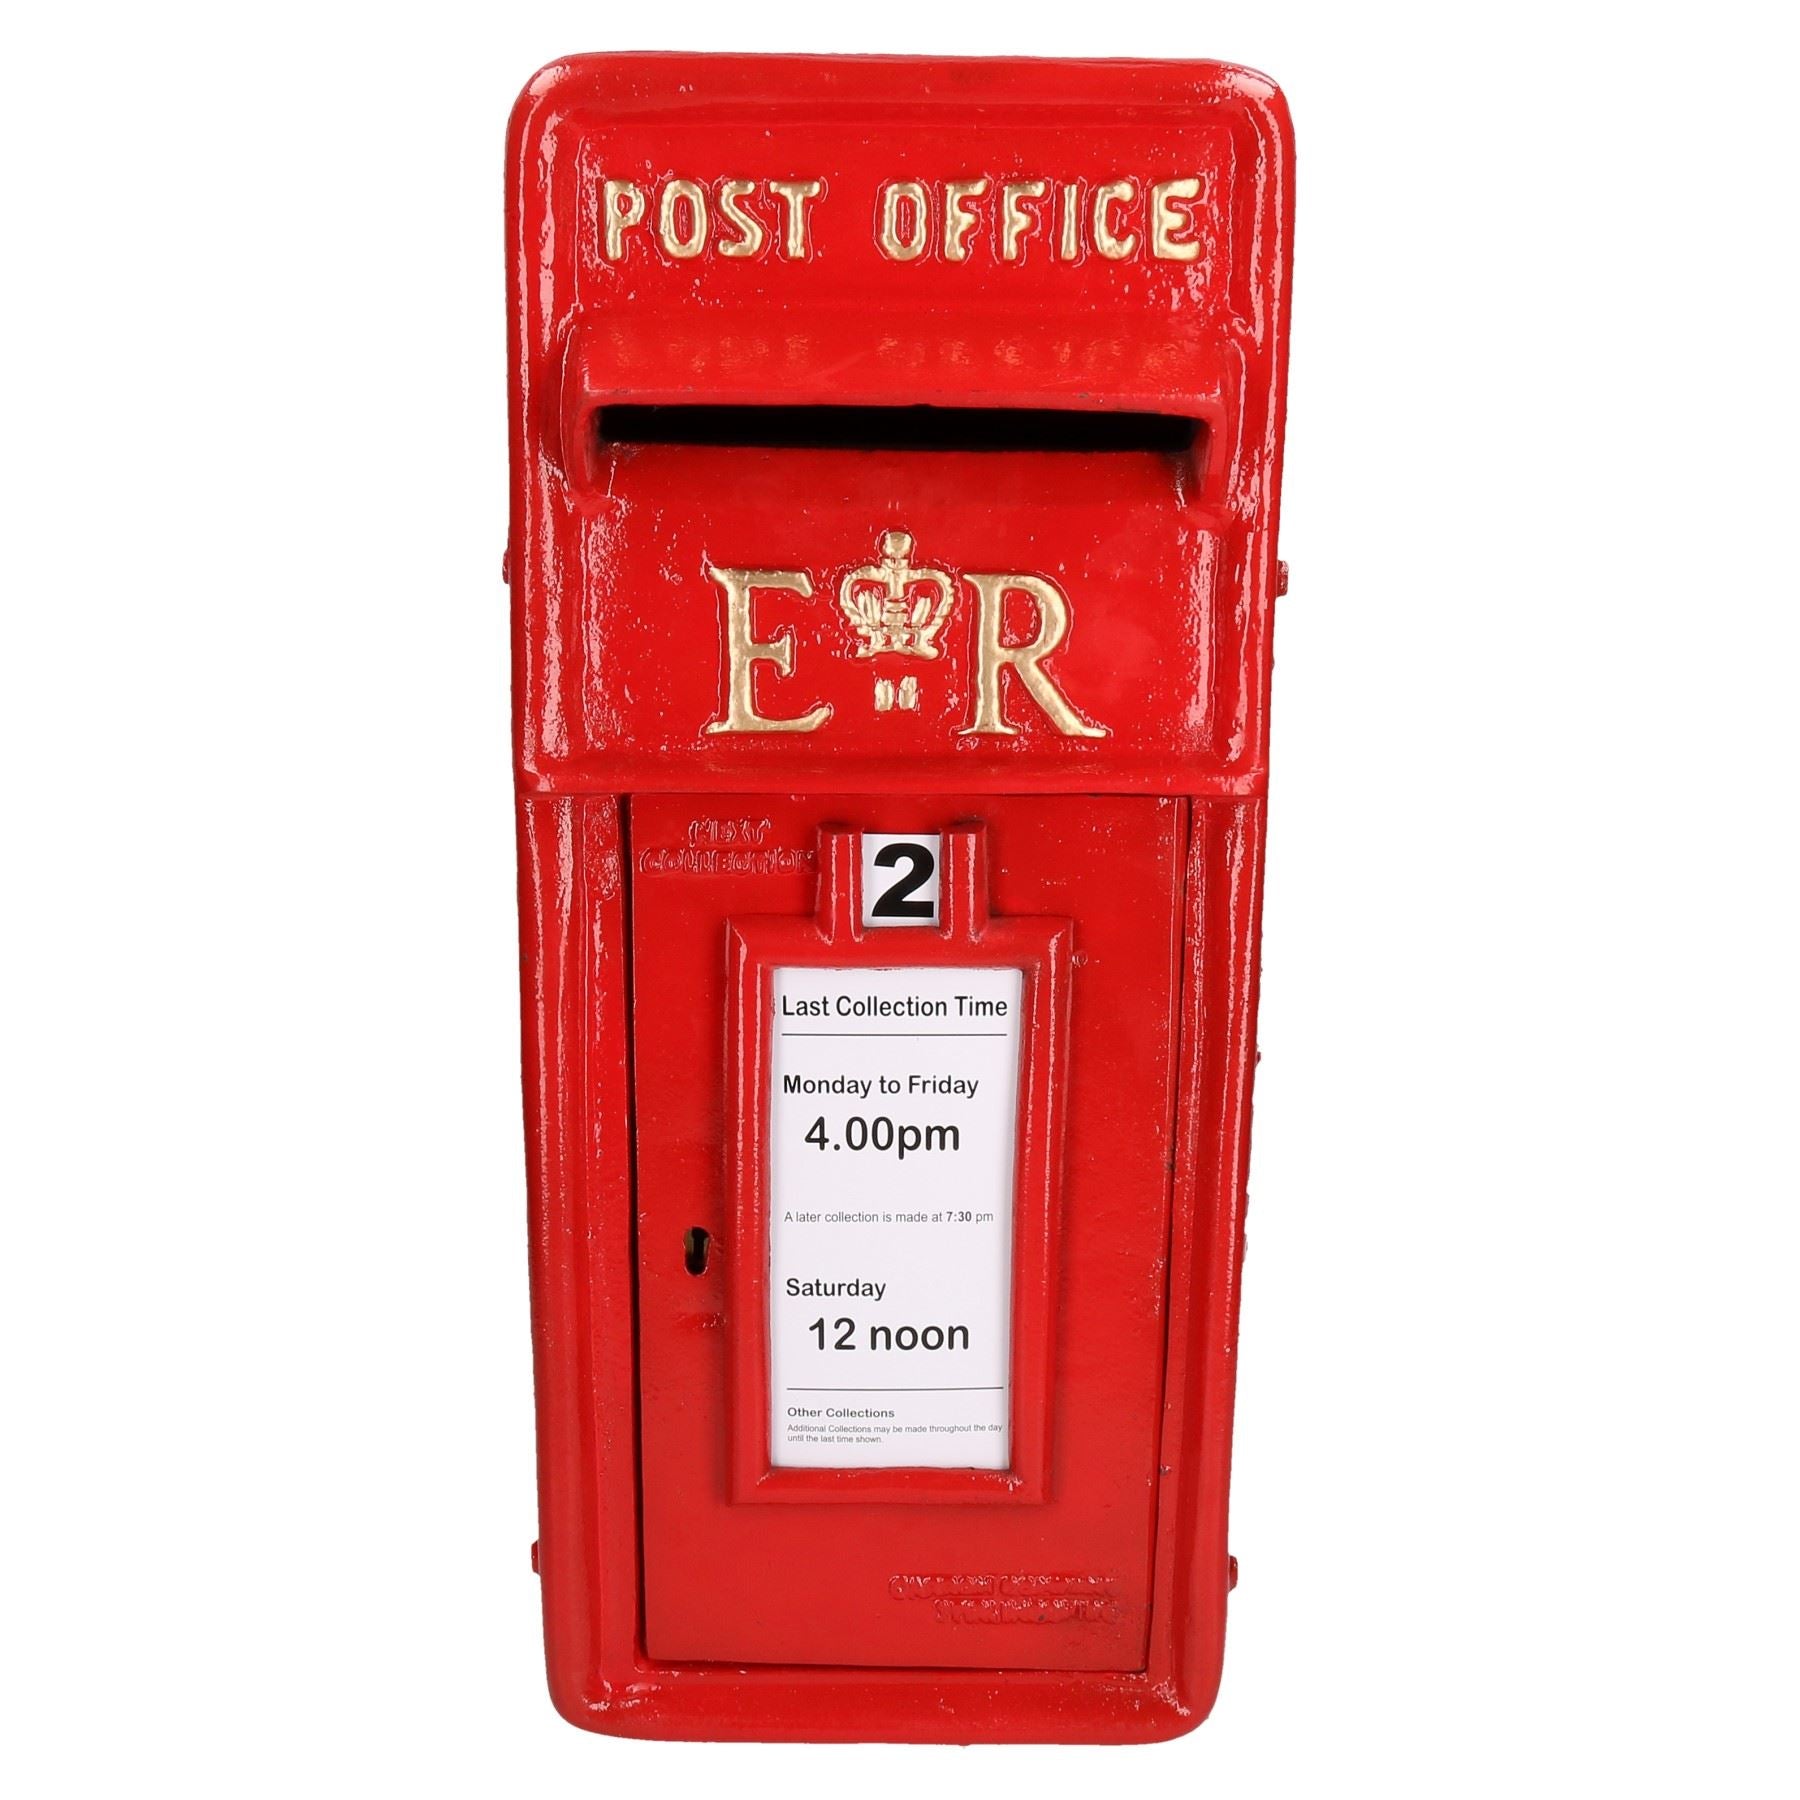 ER Royal Mail Post Mail Letter Box Replica Cast Iron Red Post Office Lockable GB